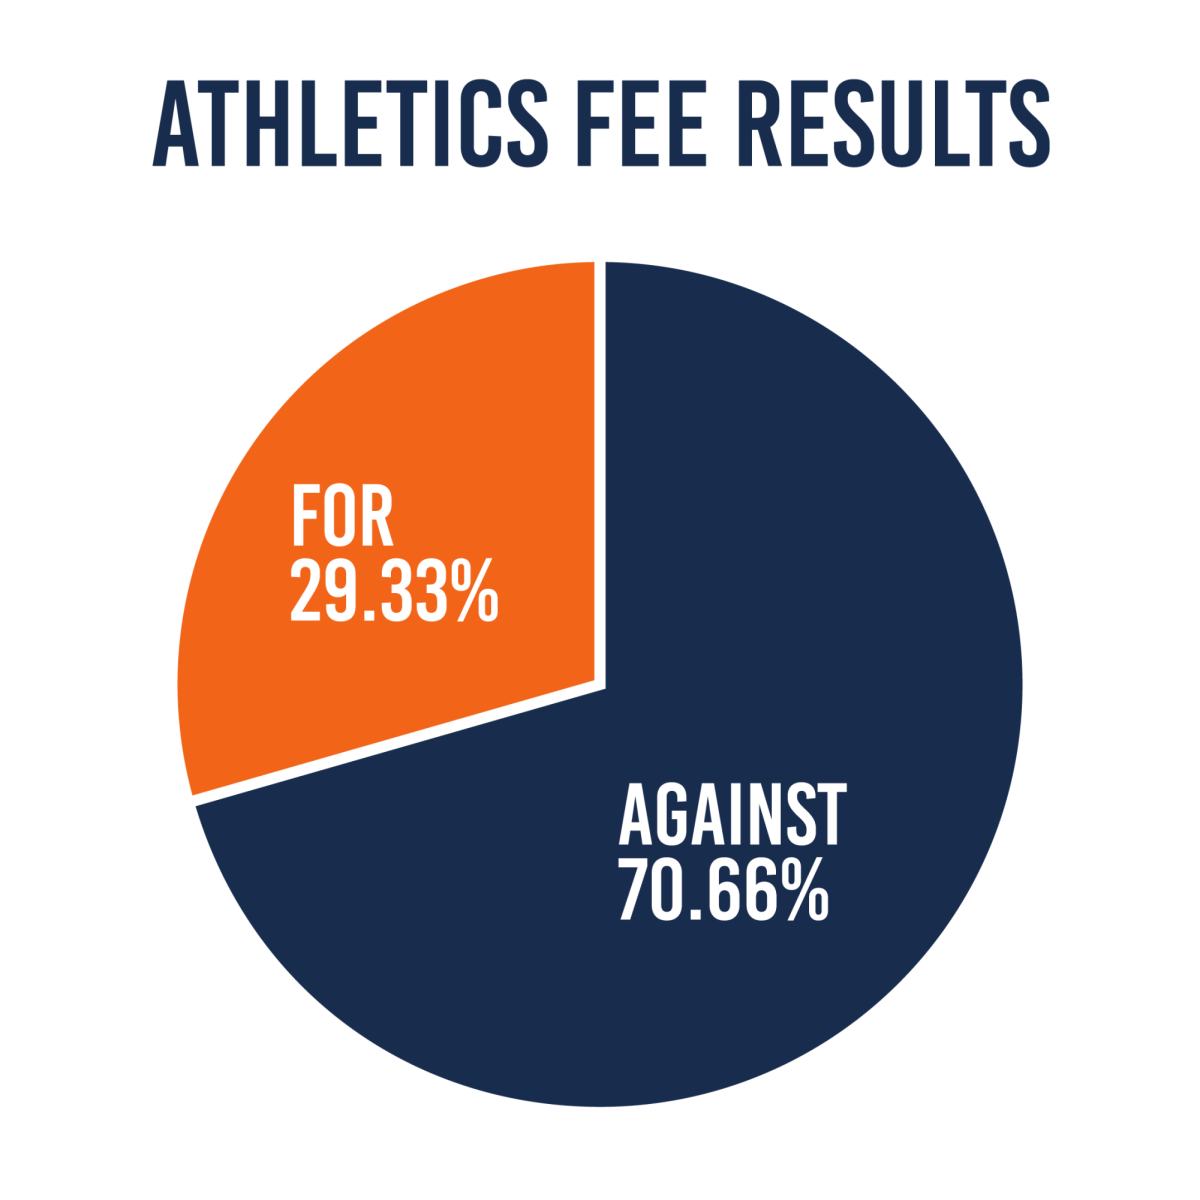 Controversial athletics fee increase fails by vote of 70.66%